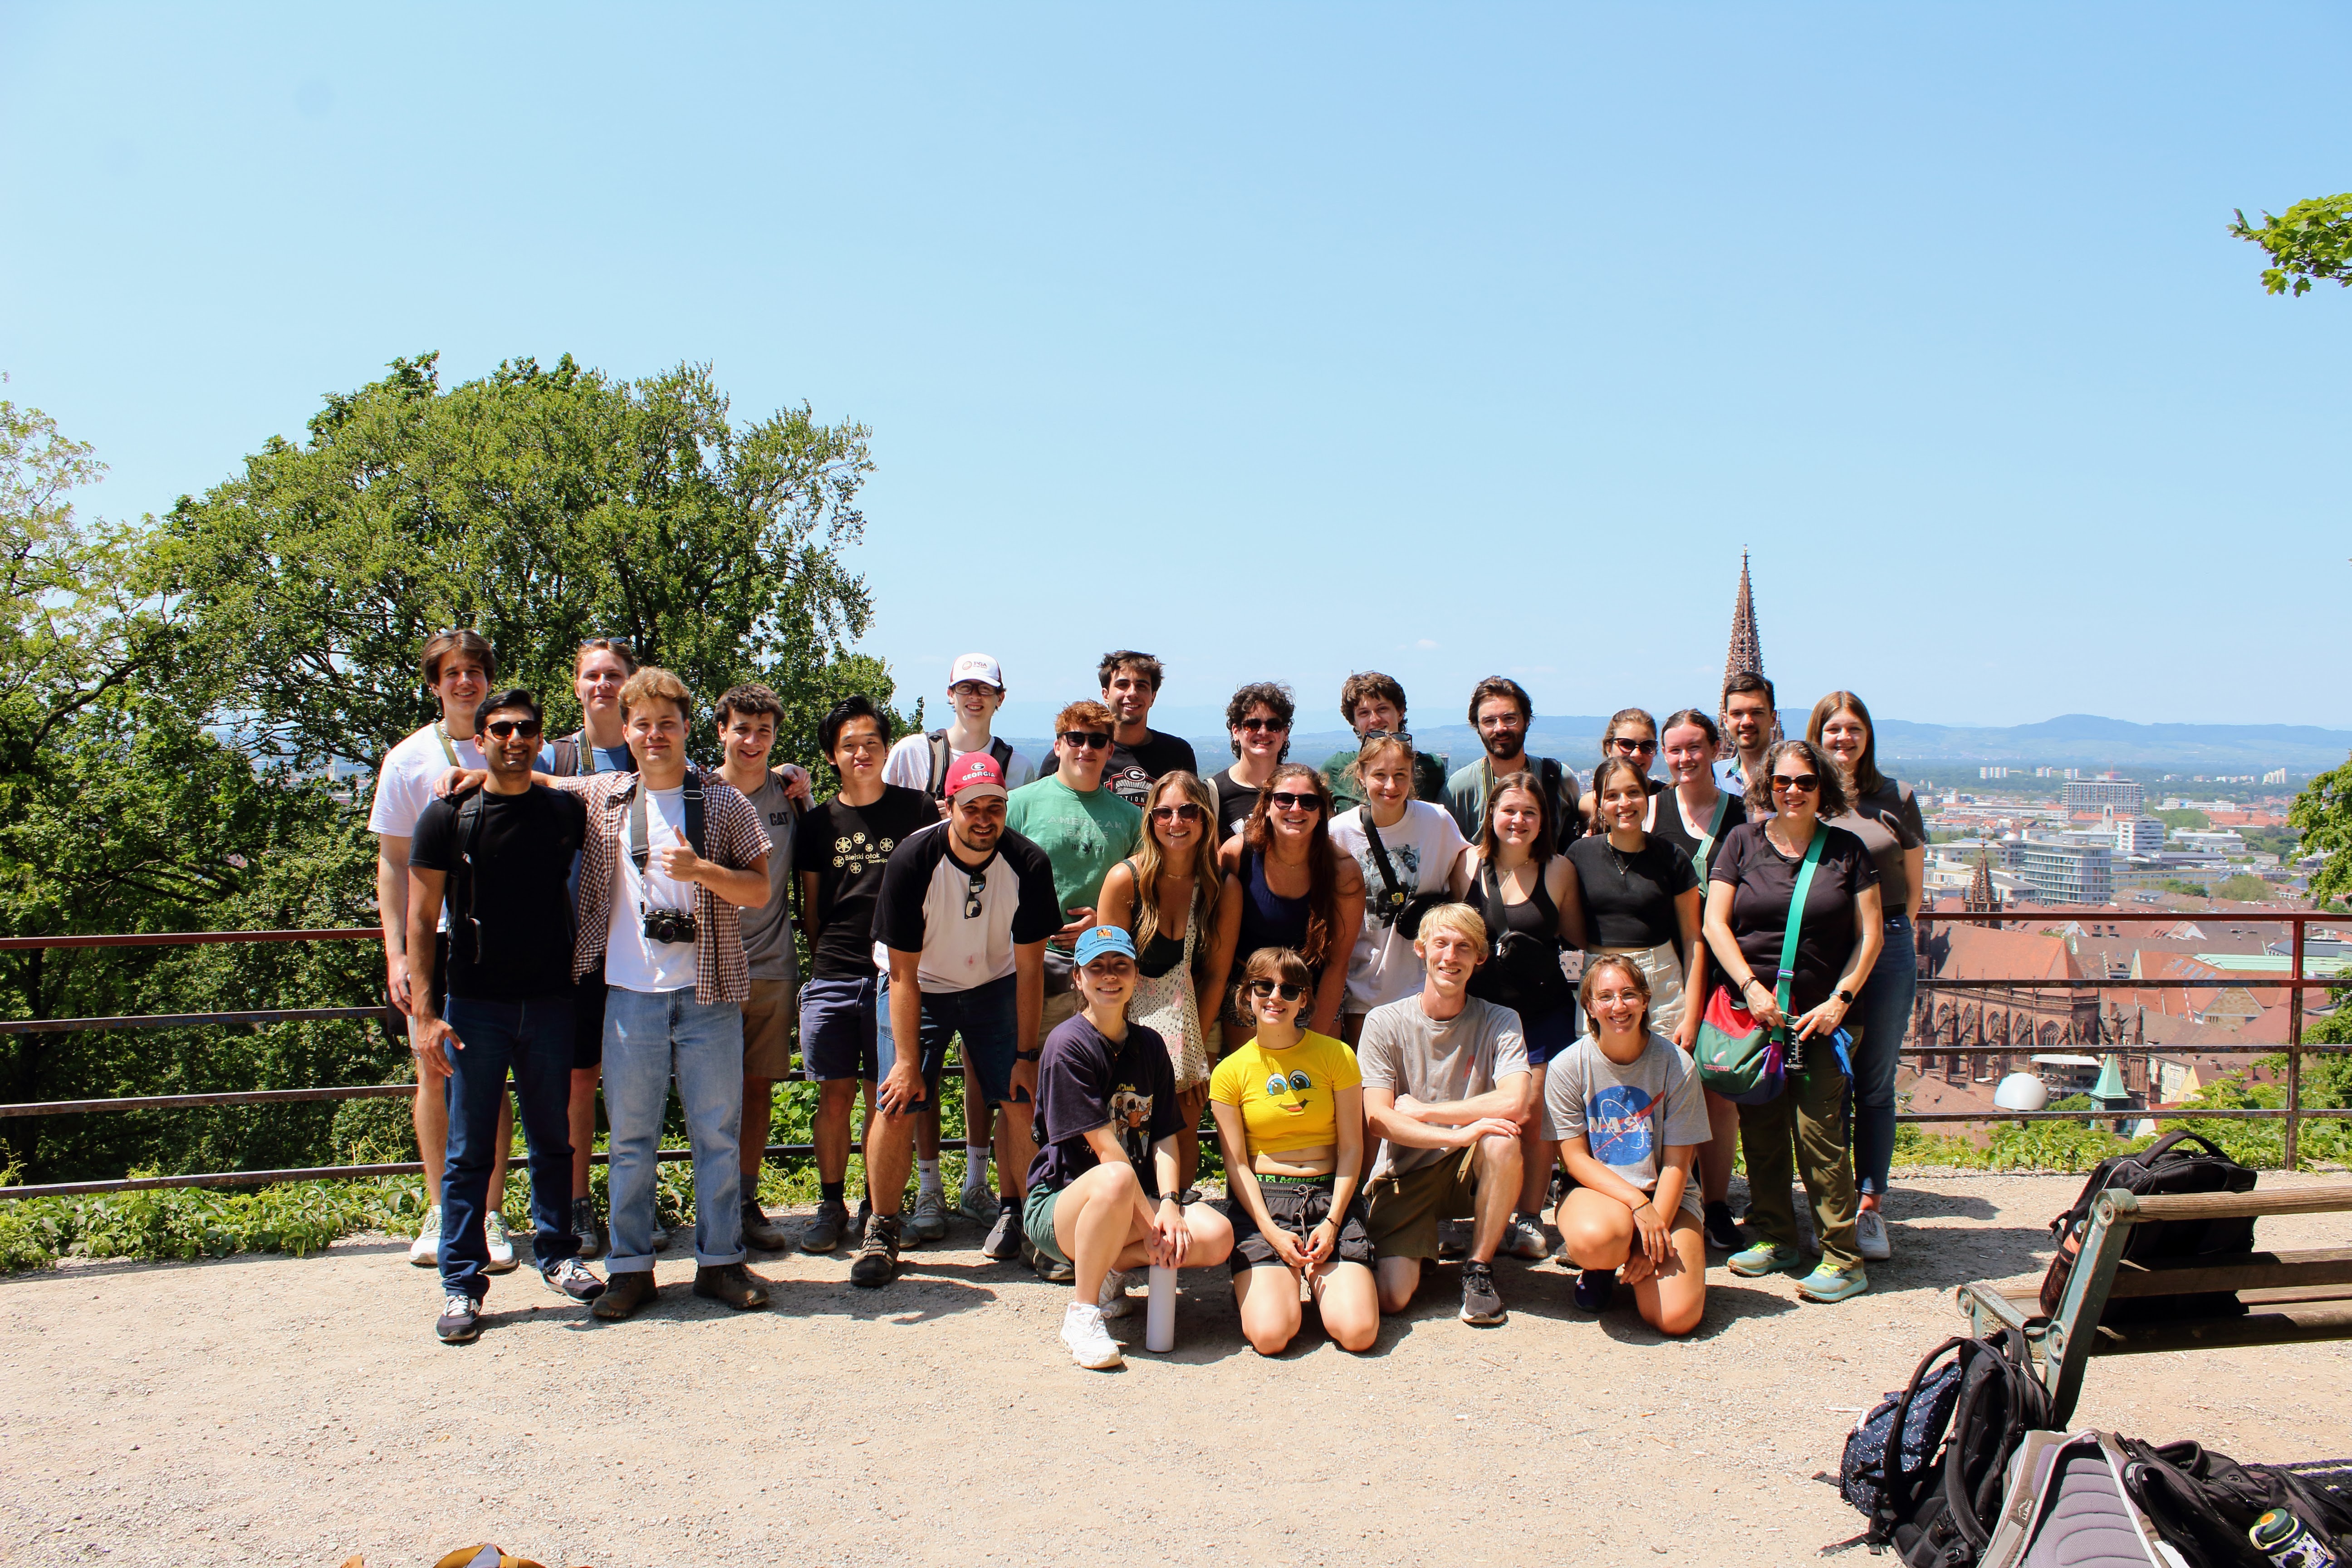 Several students stand in front of an overlook. A German city, with orange roofs and a tall spire, can be seen in the background, behind which are mountains. The sky is blue, and the sun is shining. The students are all smiling.